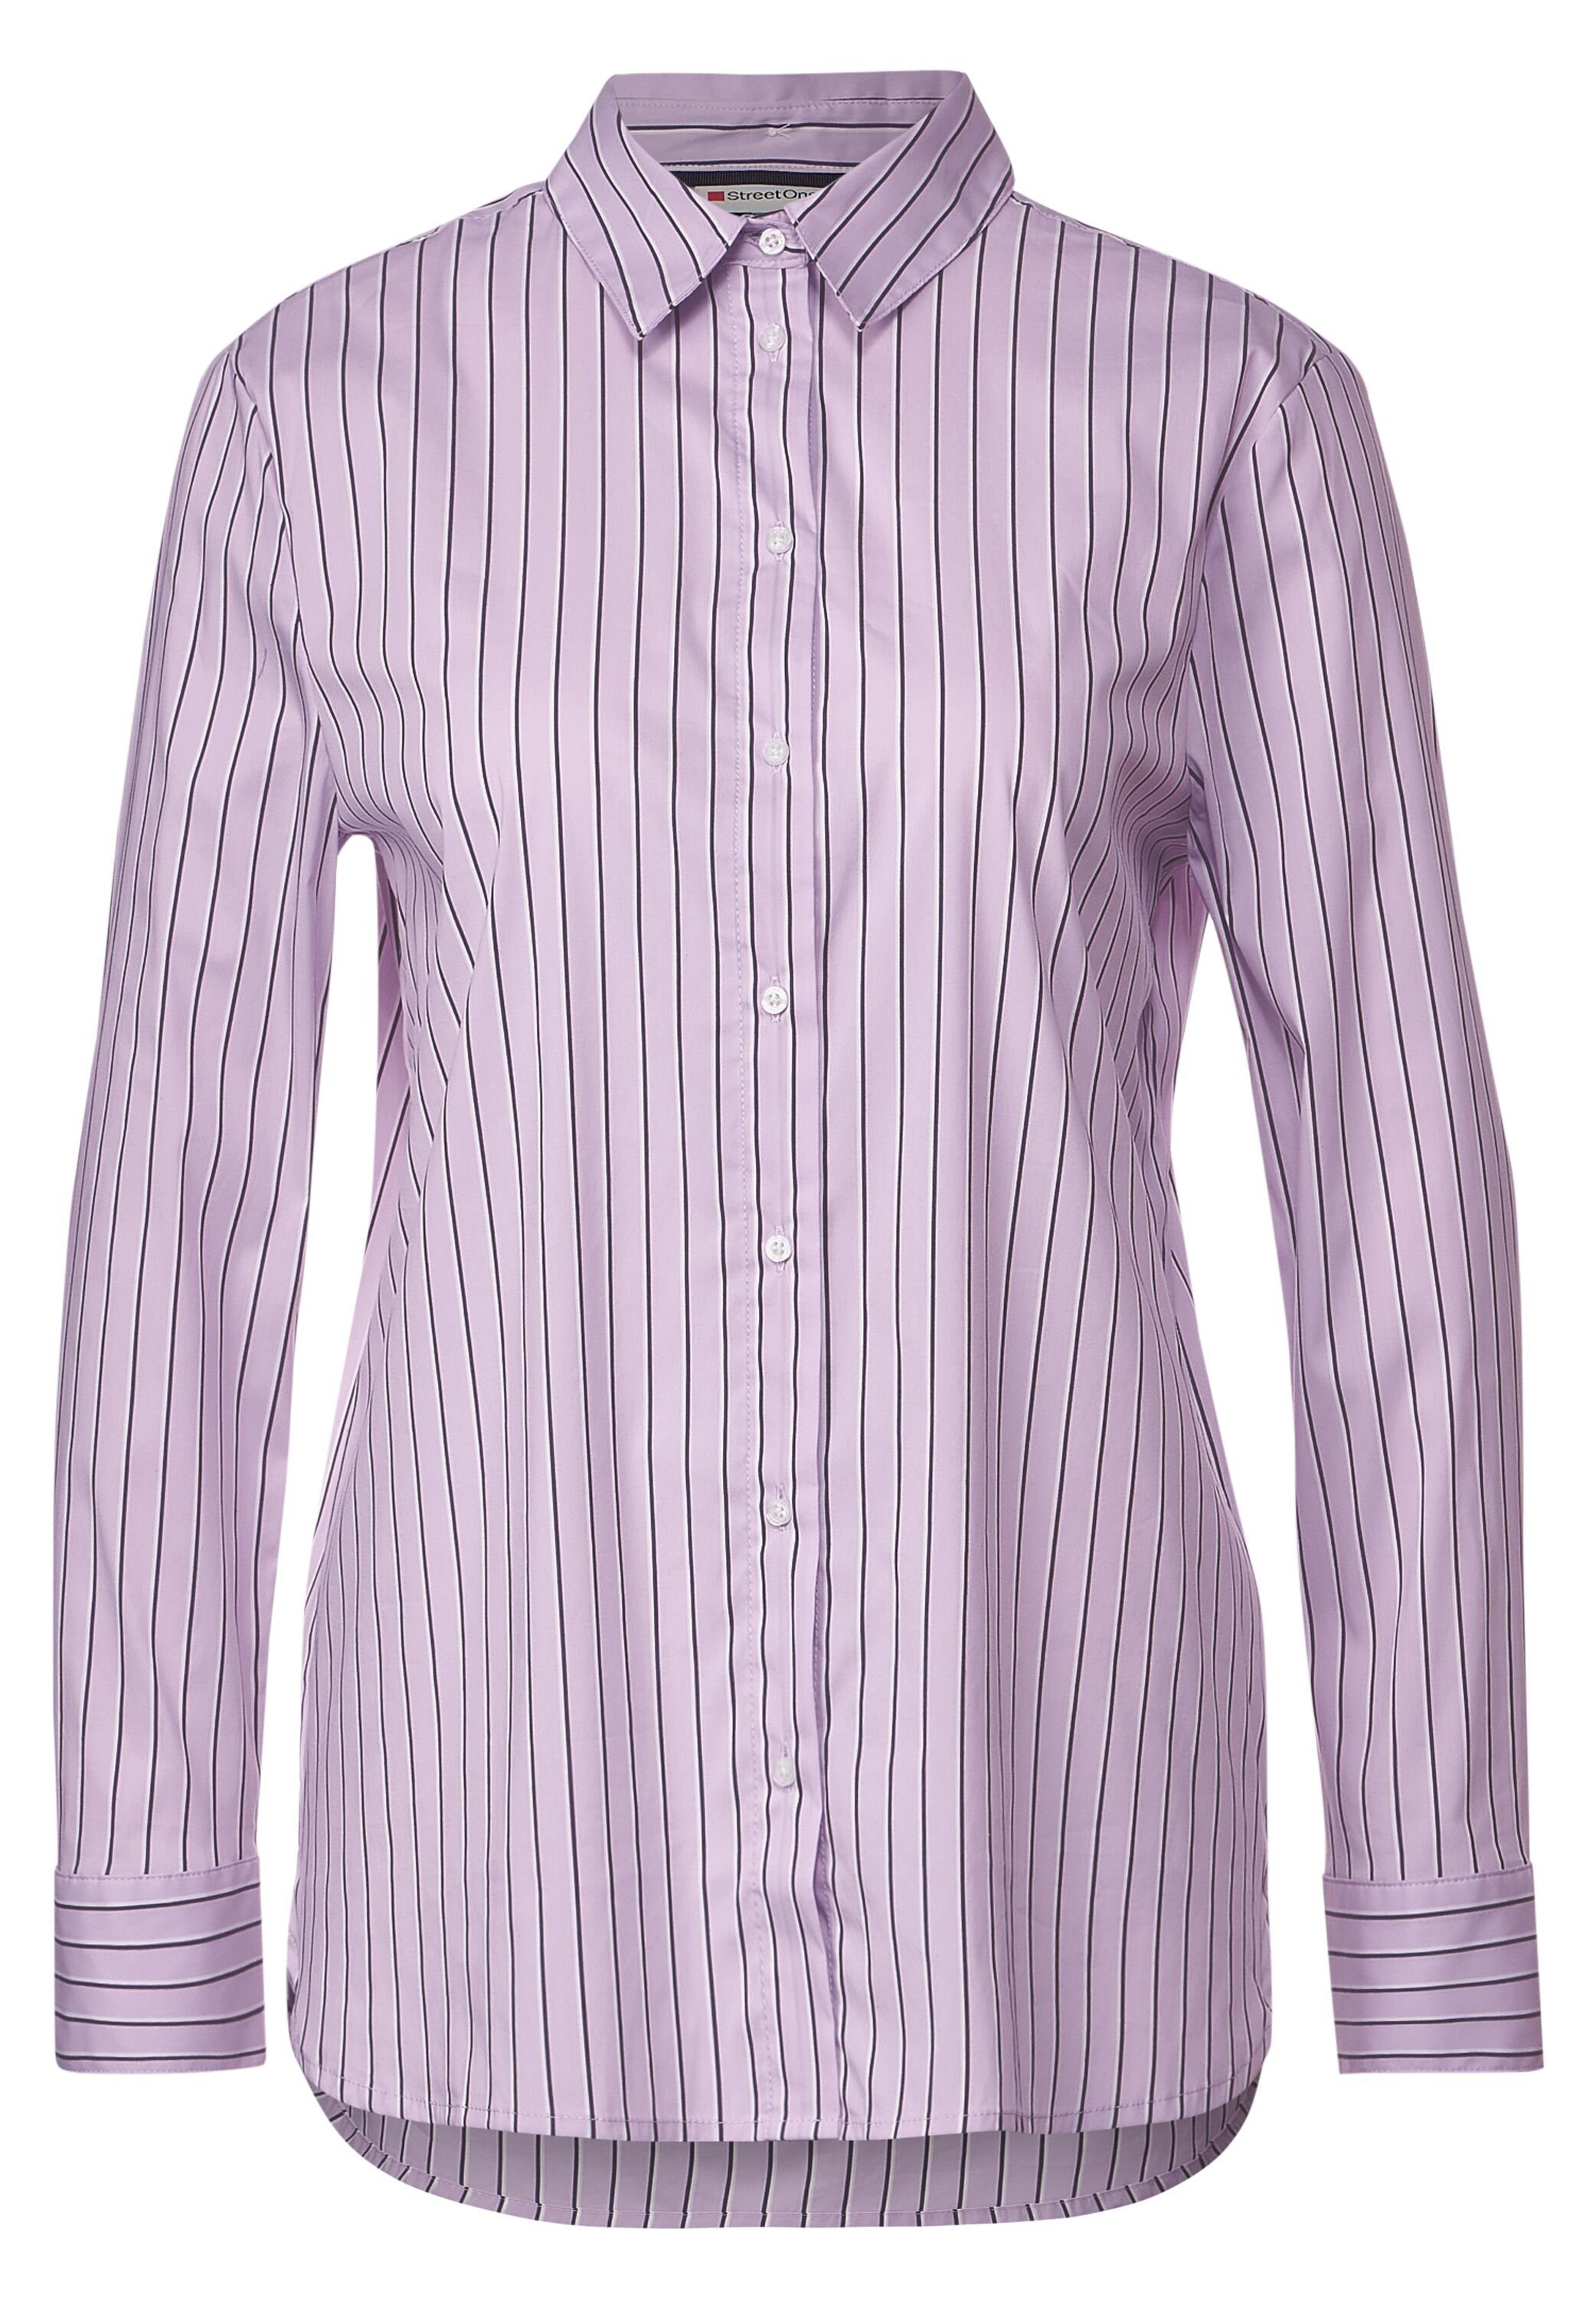 STREET ONE Longbluse Office office Streifenbluse pure Streifenmuster soft LTD lilac blouse QR Striped